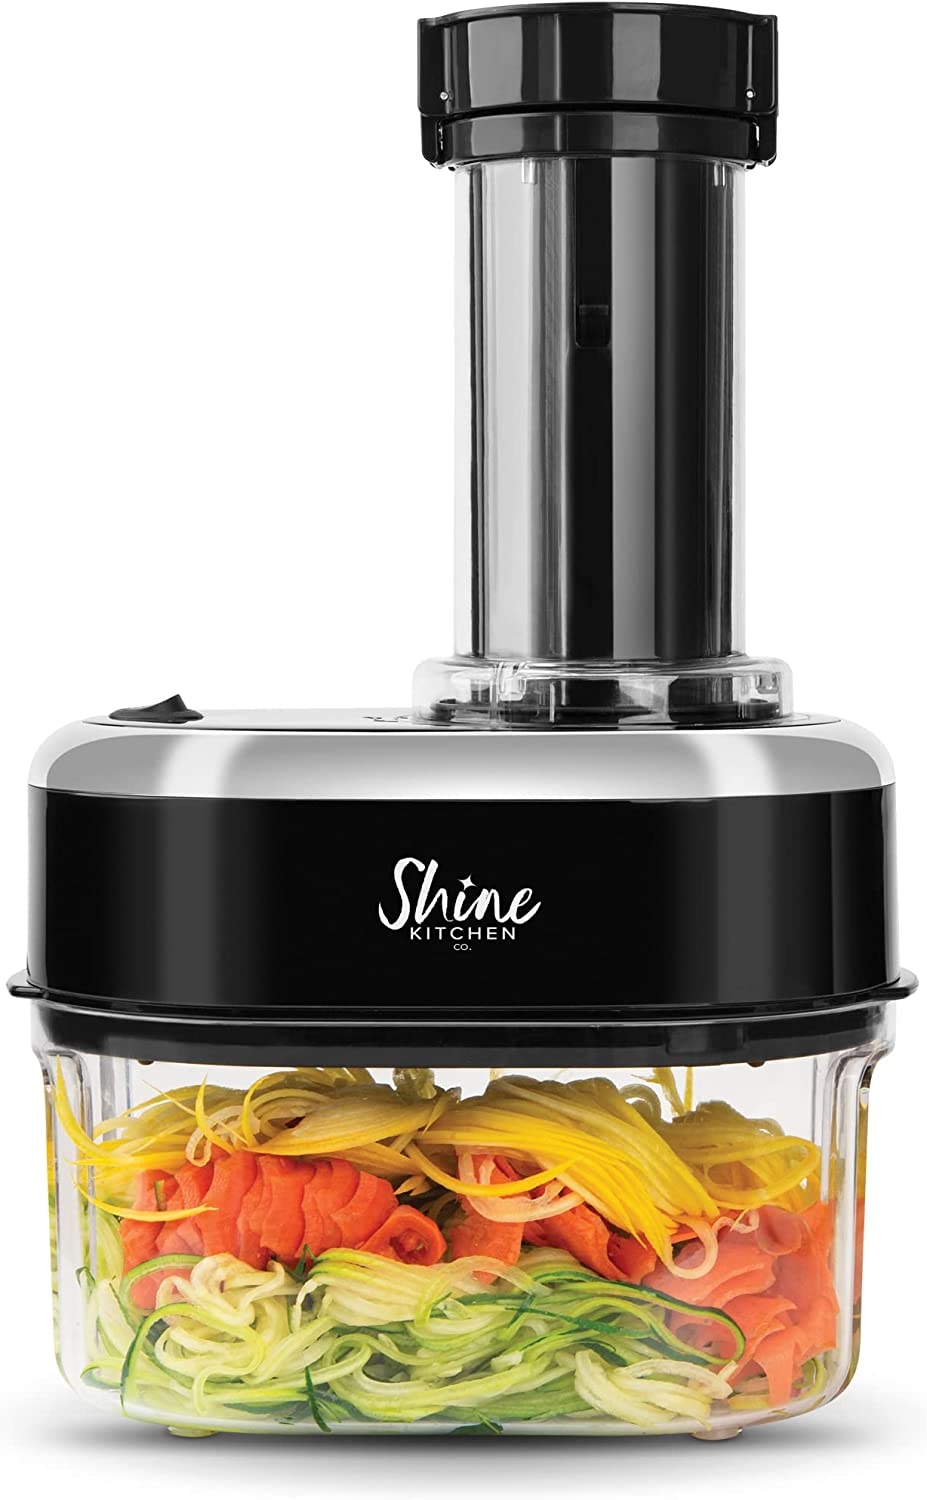 Shine Kitchen Co SES-100 Electric Spiralizer for Veggies, Spiral Vegetable Cutter Makes and Holds Up to 4 Servings (60 oz) of